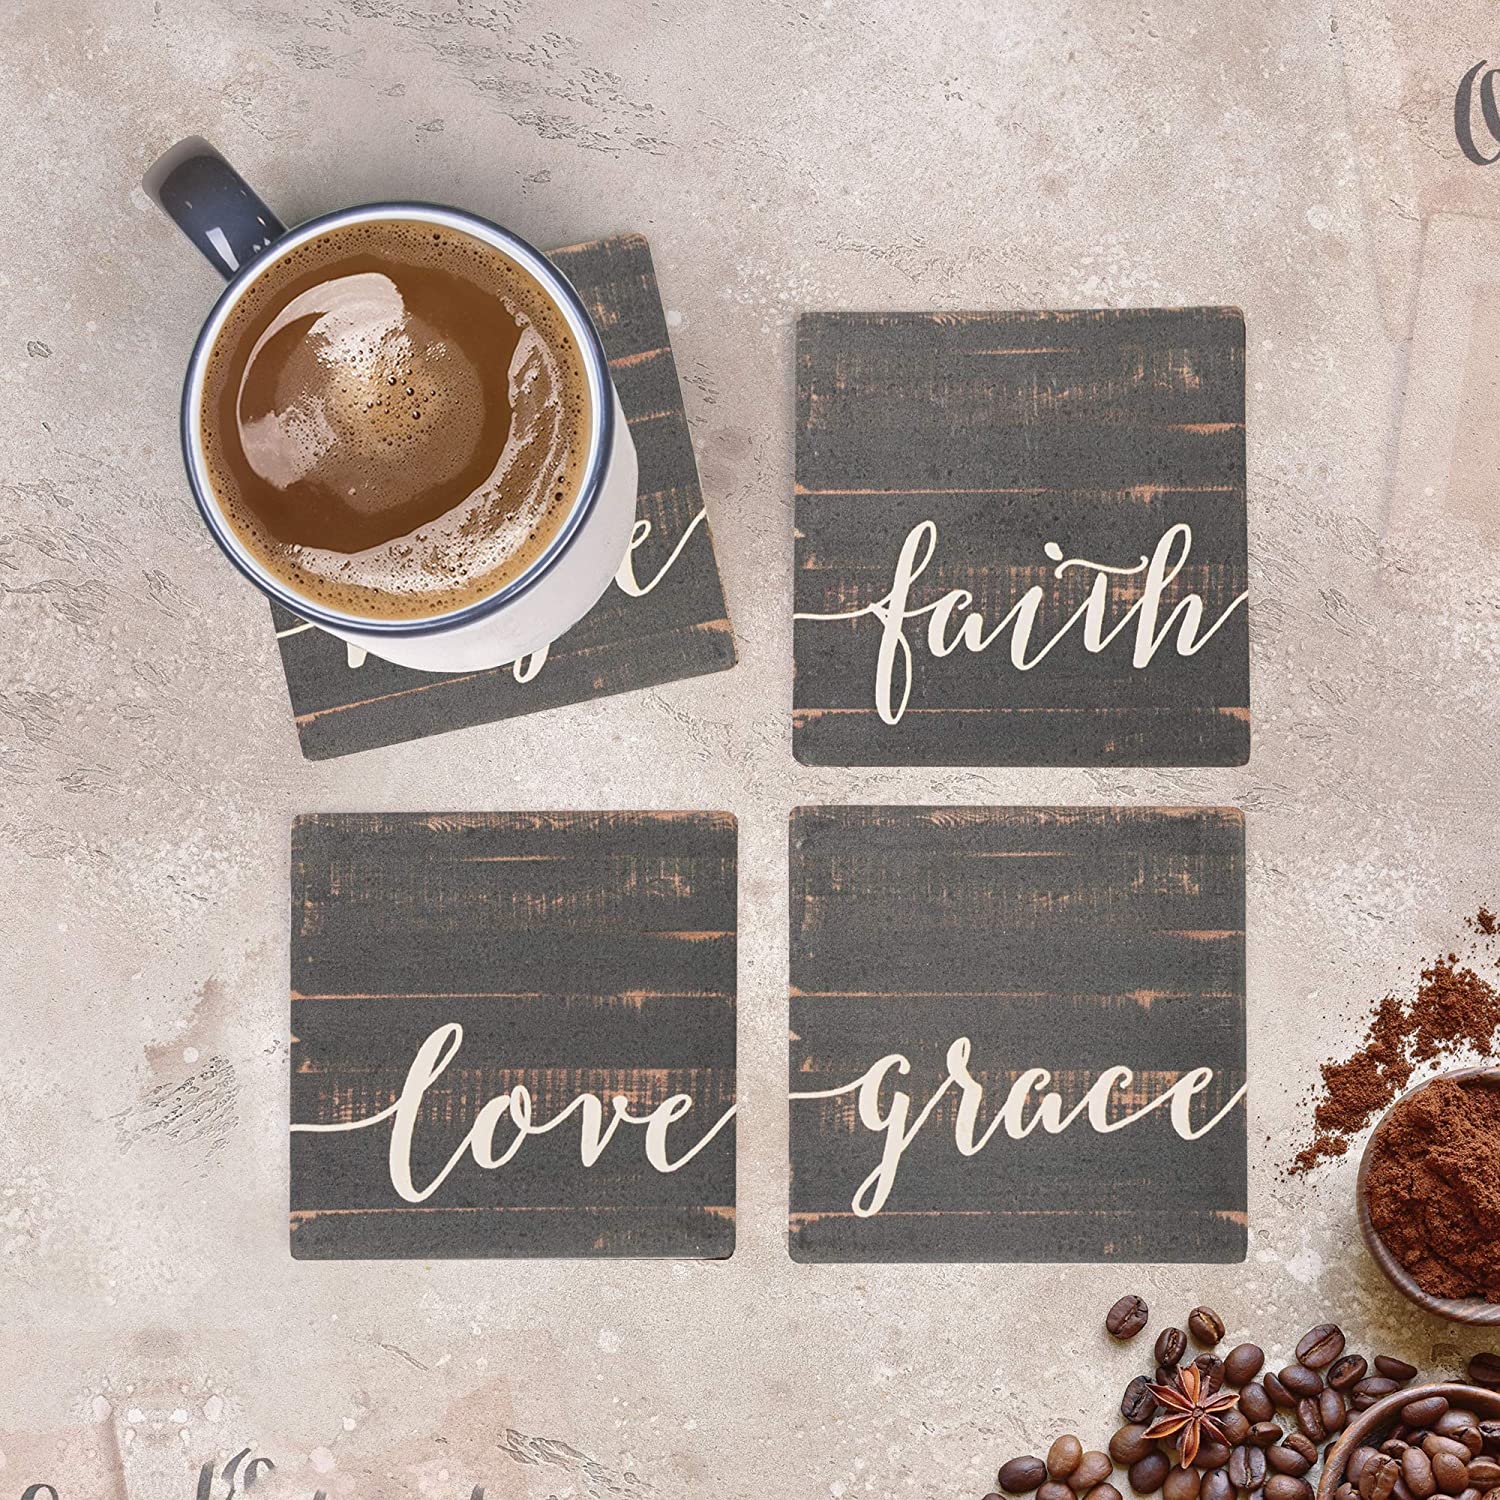 Love Faith Grace Hope Distressed Wood Look 4 x 4 Absorbent Ceramic Coasters Set of 4